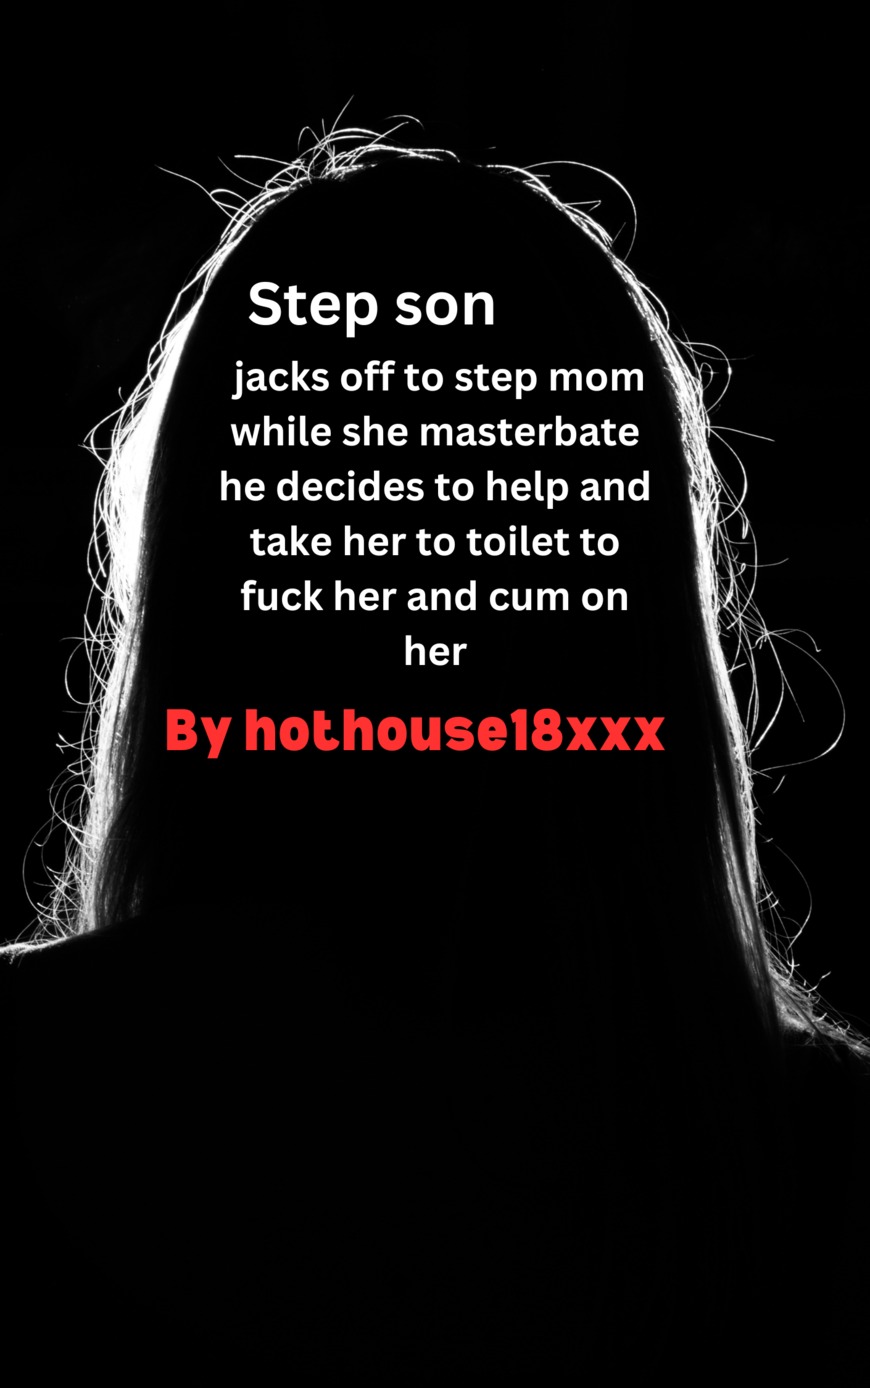 Horny step son jacks of to step mom while she masterbate he decides to help and take her to toilet to fuck her and cum on her - clip coverforeground